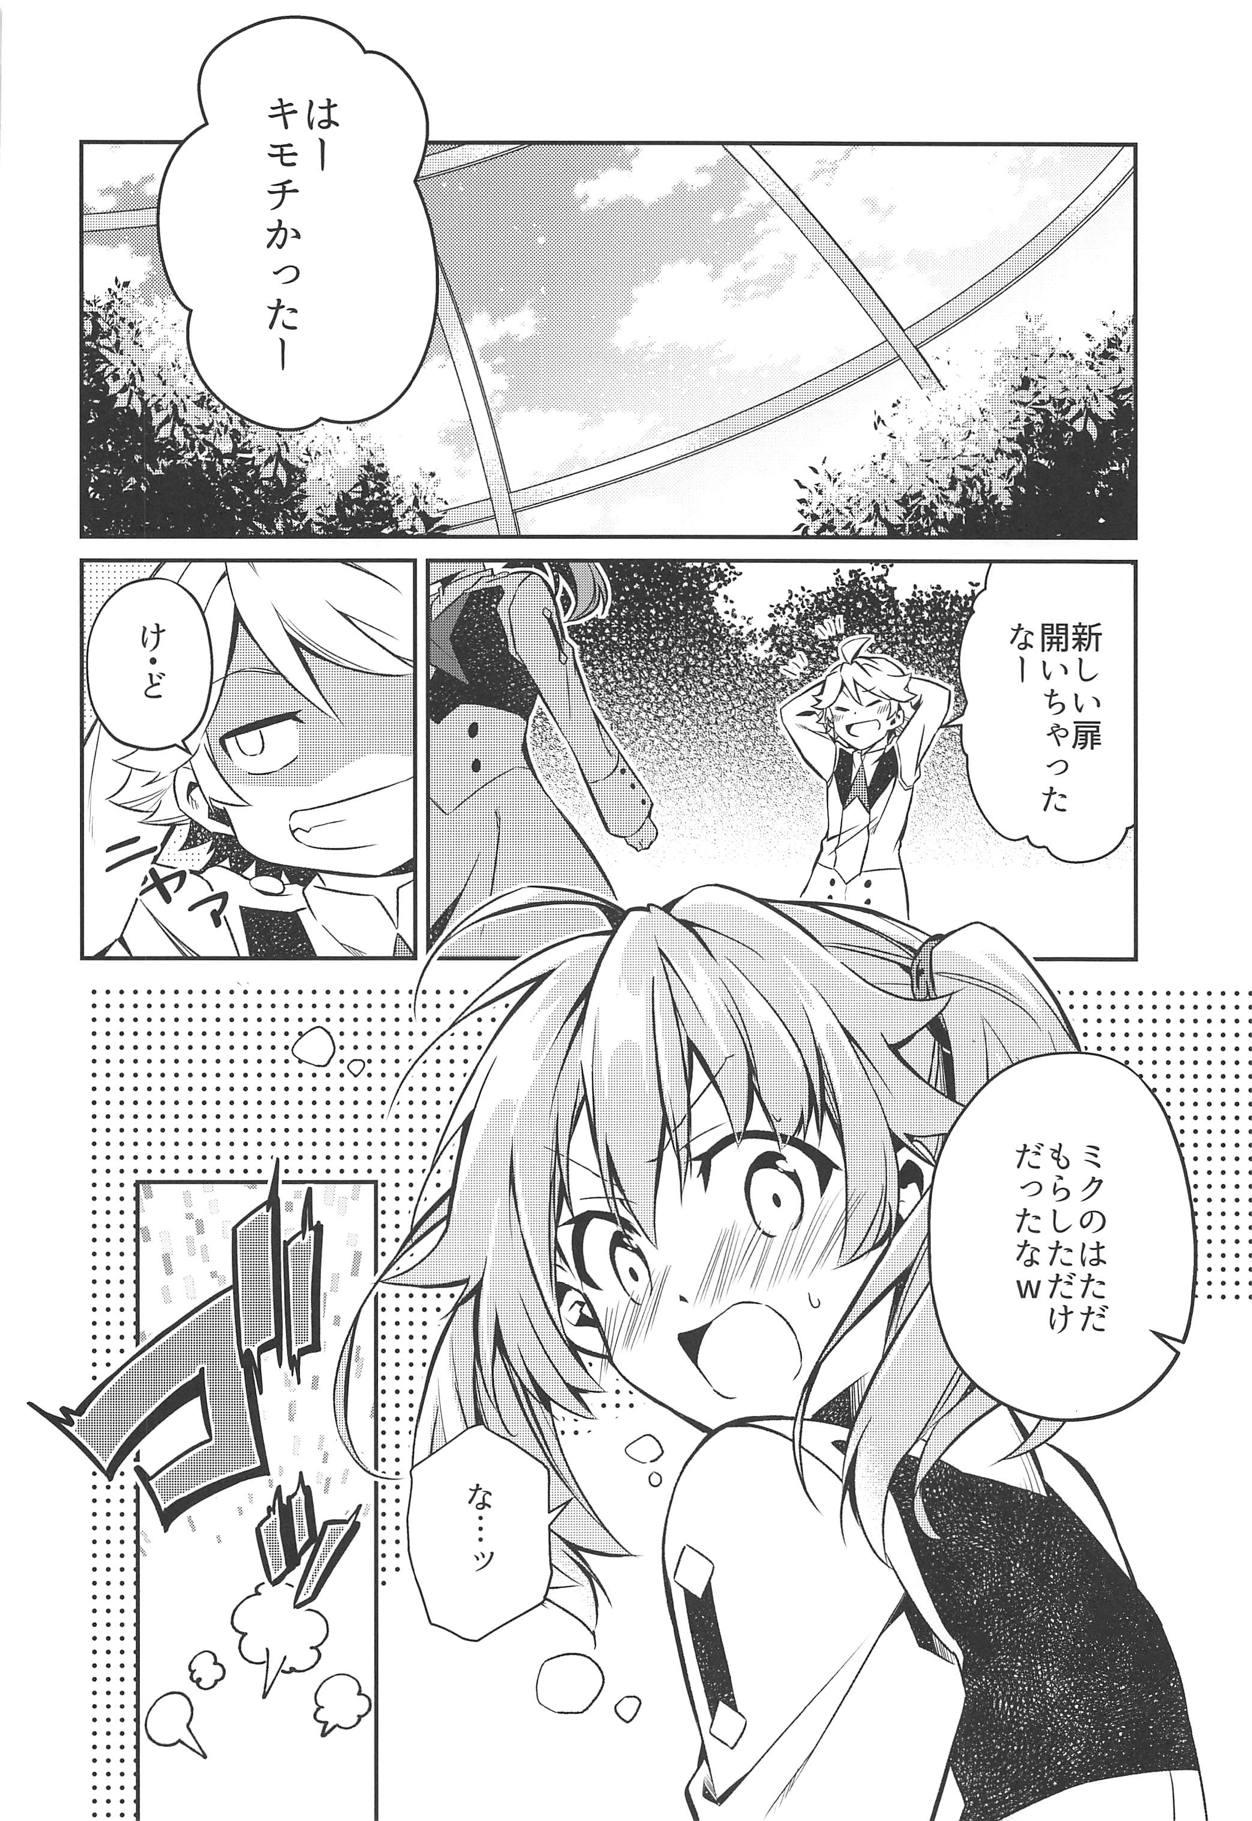 Blackmail KISS OF EROS - Darling in the franxx Masturbation - Page 11